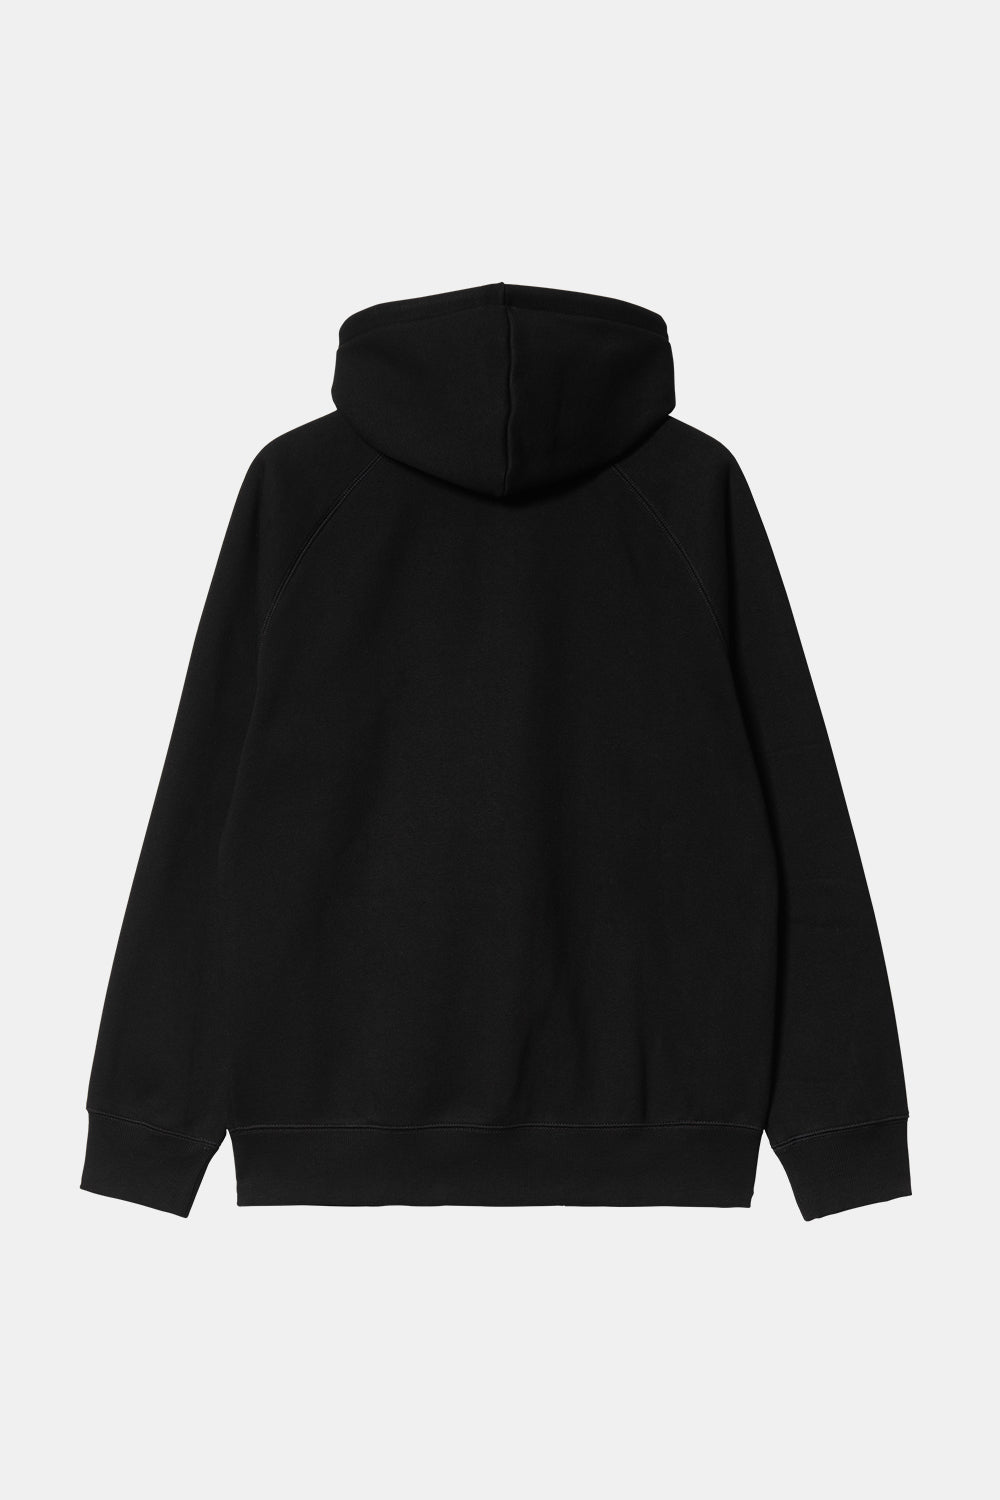 Carhartt WIP Hooded Chase Jacket (Black/Gold)